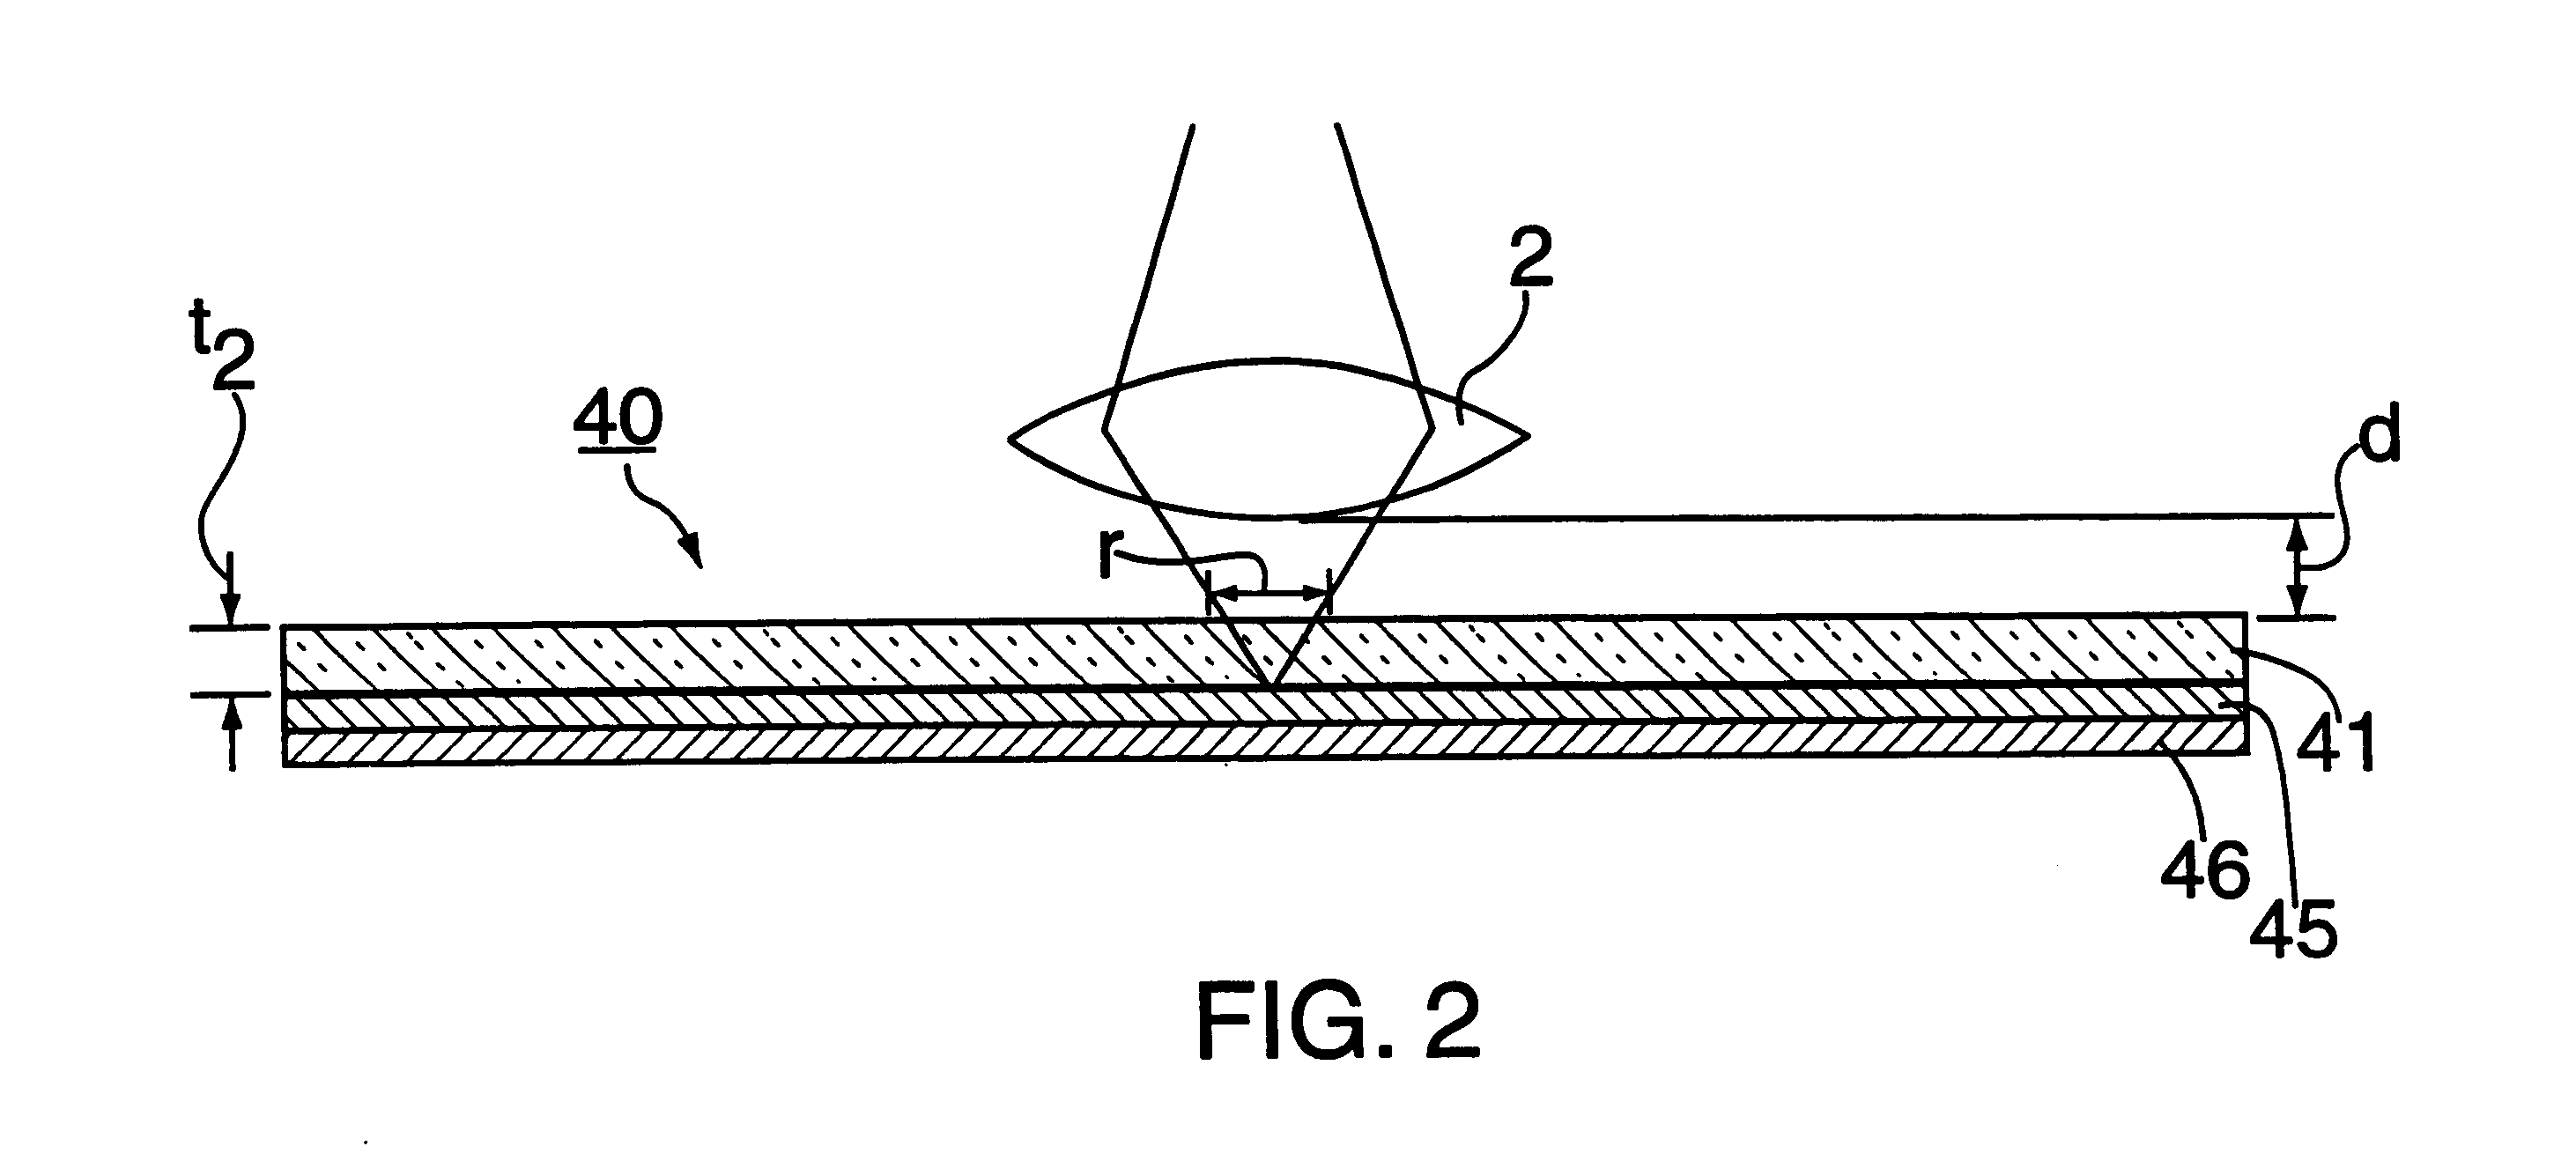 Optical disk having a protective layer specified thickness relative to the NA of an objective lens and the wavelength of light source